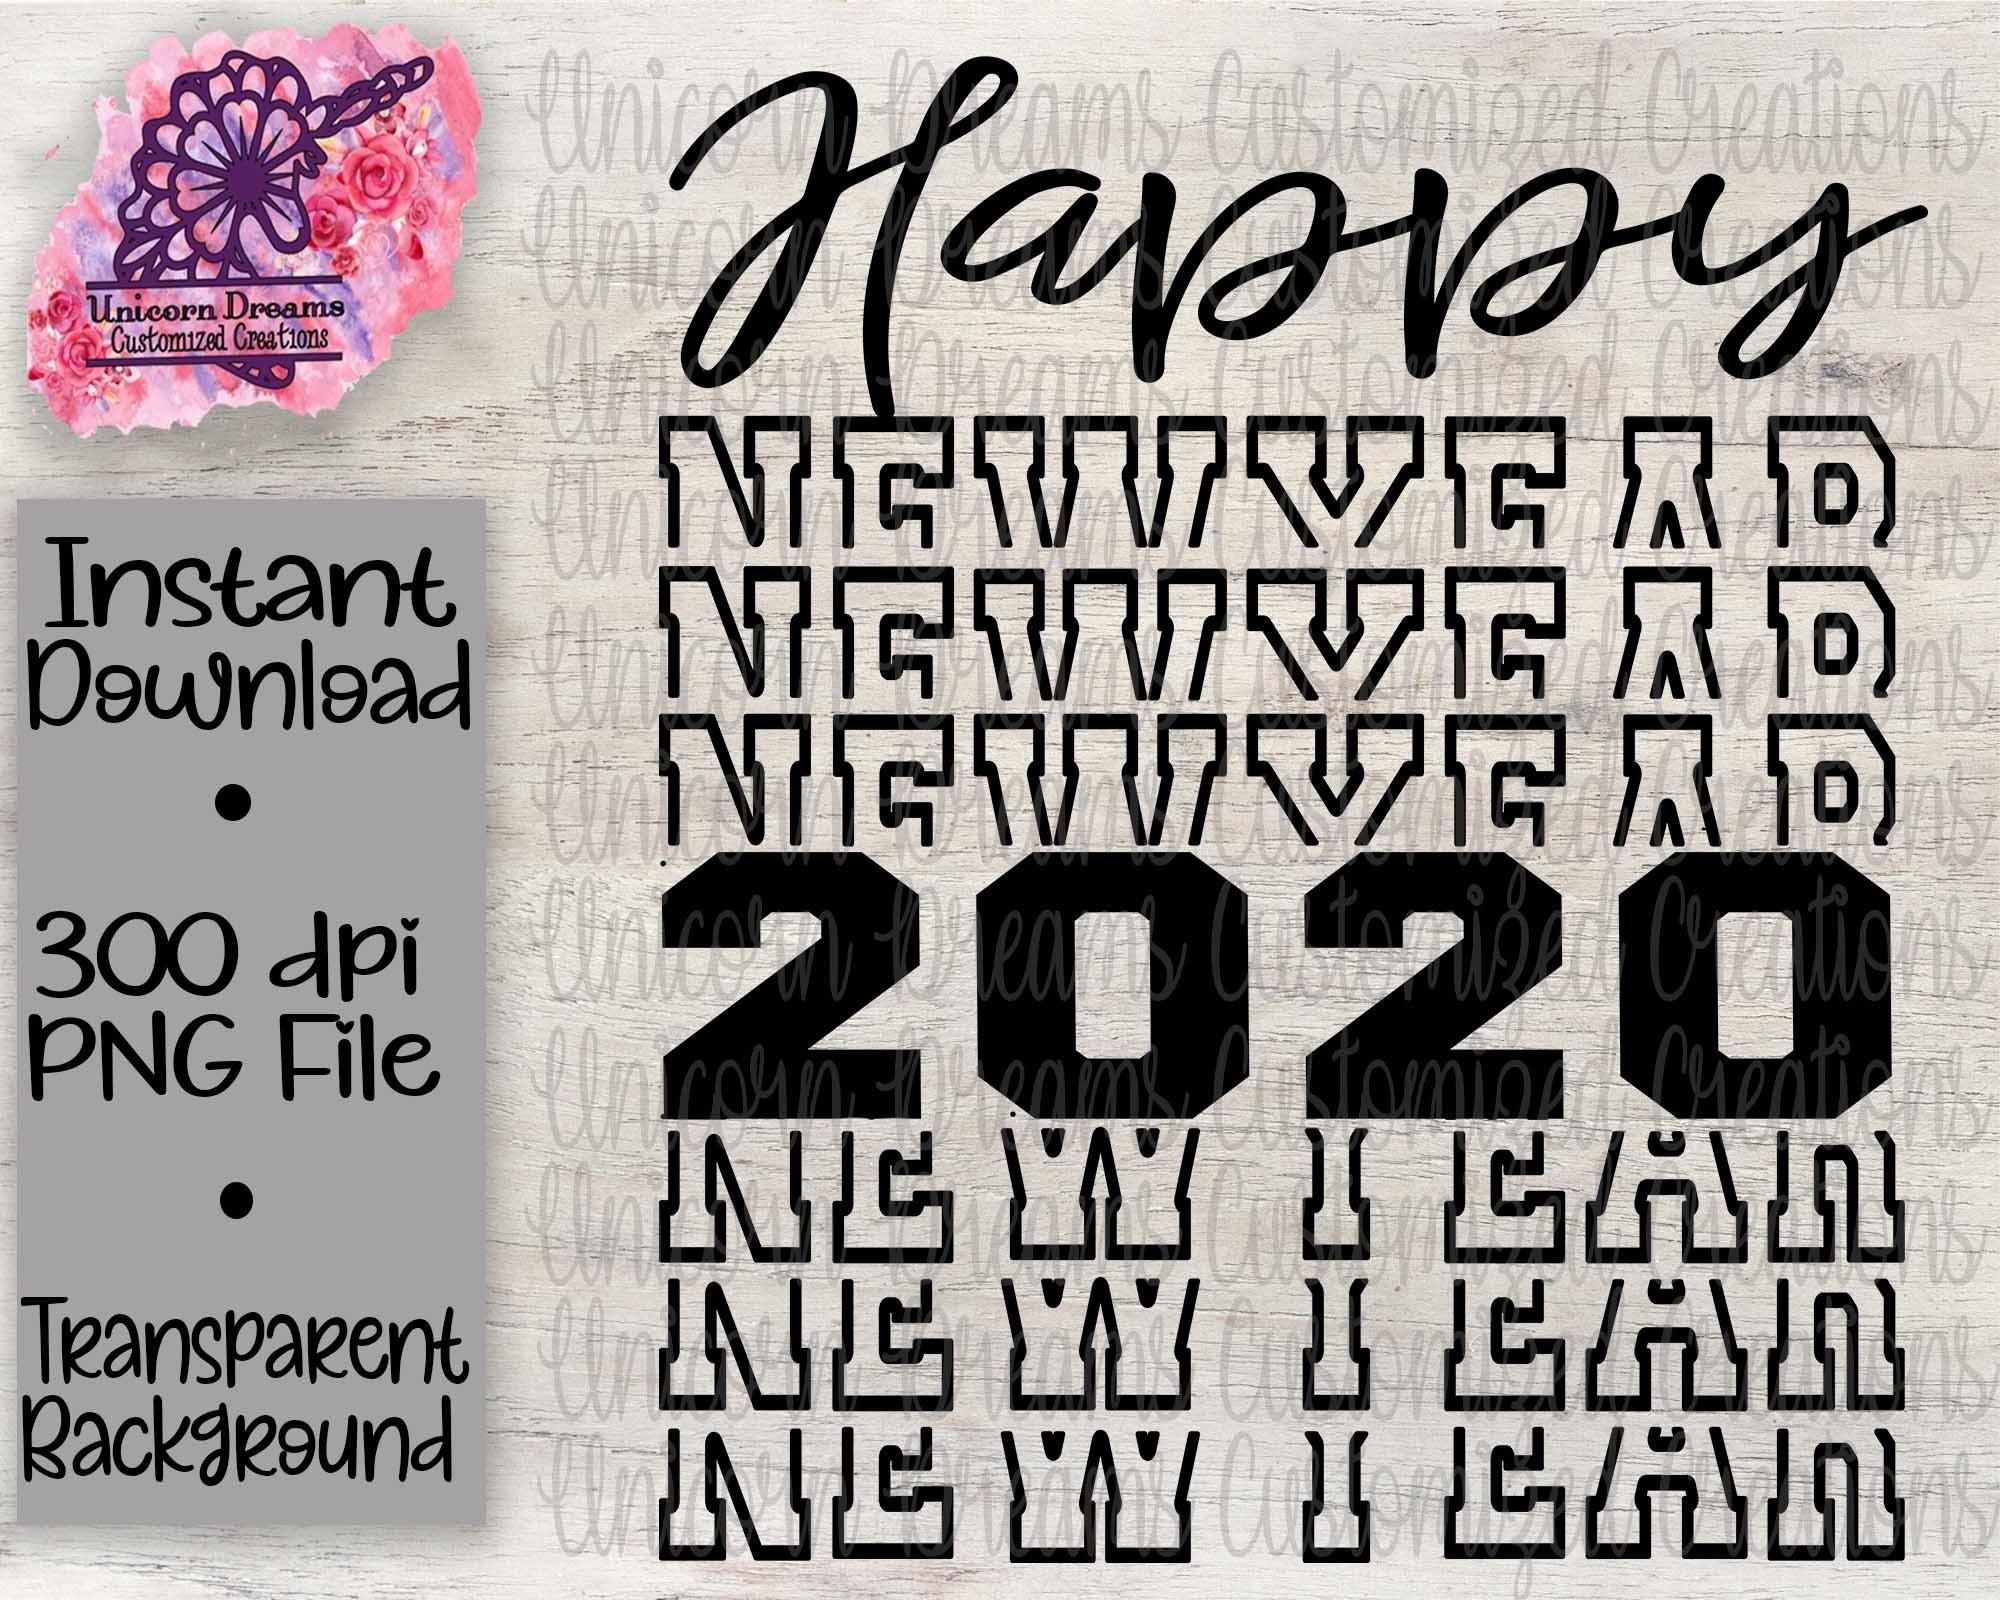 Happy New Year 2020 PNG Digital Download - Unicorn Dreams Customized Creations